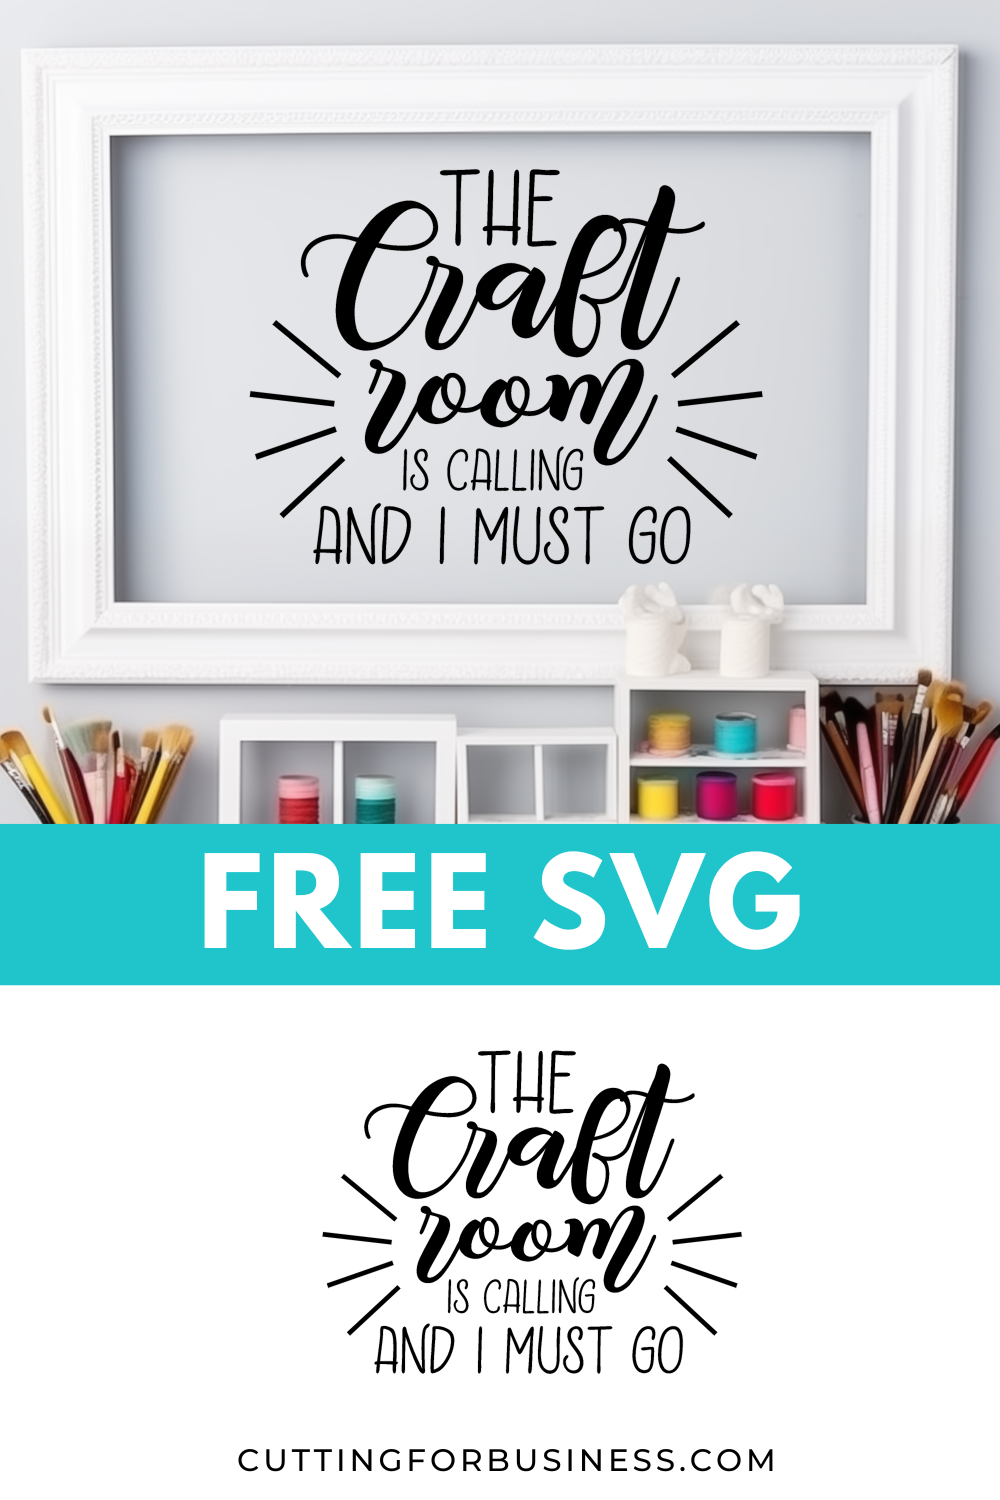 Free SVG - The Craft Room is Calling and I Must Go - cuttingforbusiness.com